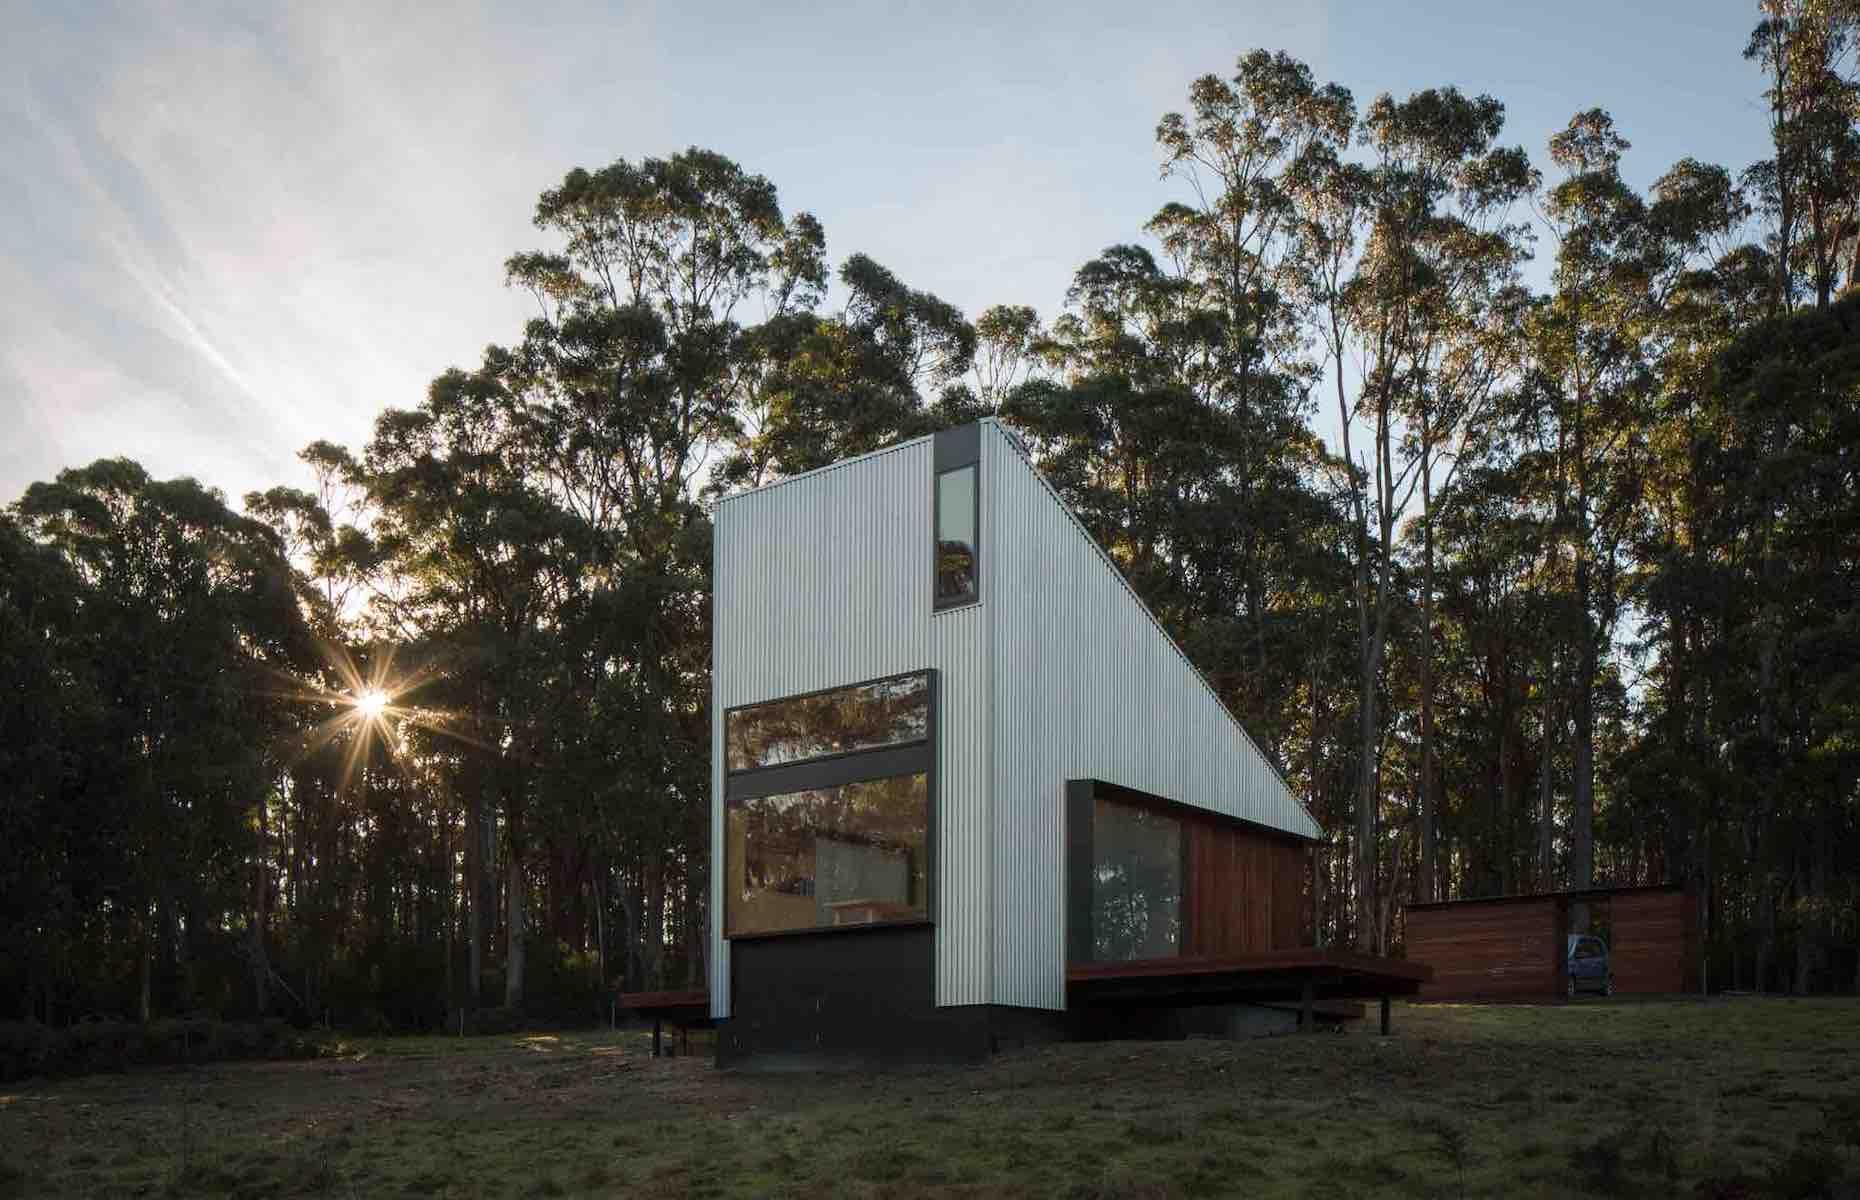 <p>Peace and solitude are what a stay in <a href="https://www.airbnb.com.au/rooms/20942329">this minimalist little Airbnb cabin</a> secreted in a little forest clearing on Tasmania’s Bruny Island is all about. All clean lines, open spaces and light-colored timber, the architecturally designed cabin was inspired by traditional Japanese houses. It’s pleasingly cozy inside, with a log-burning stove and sheepskin rugs set by the windows. Outside, the large deck has a sunken bath and there's a swing for gliding serenely through the trees. With zero light pollution, the aurora australis (or Southern Lights) may even make an appearance at night. </p>